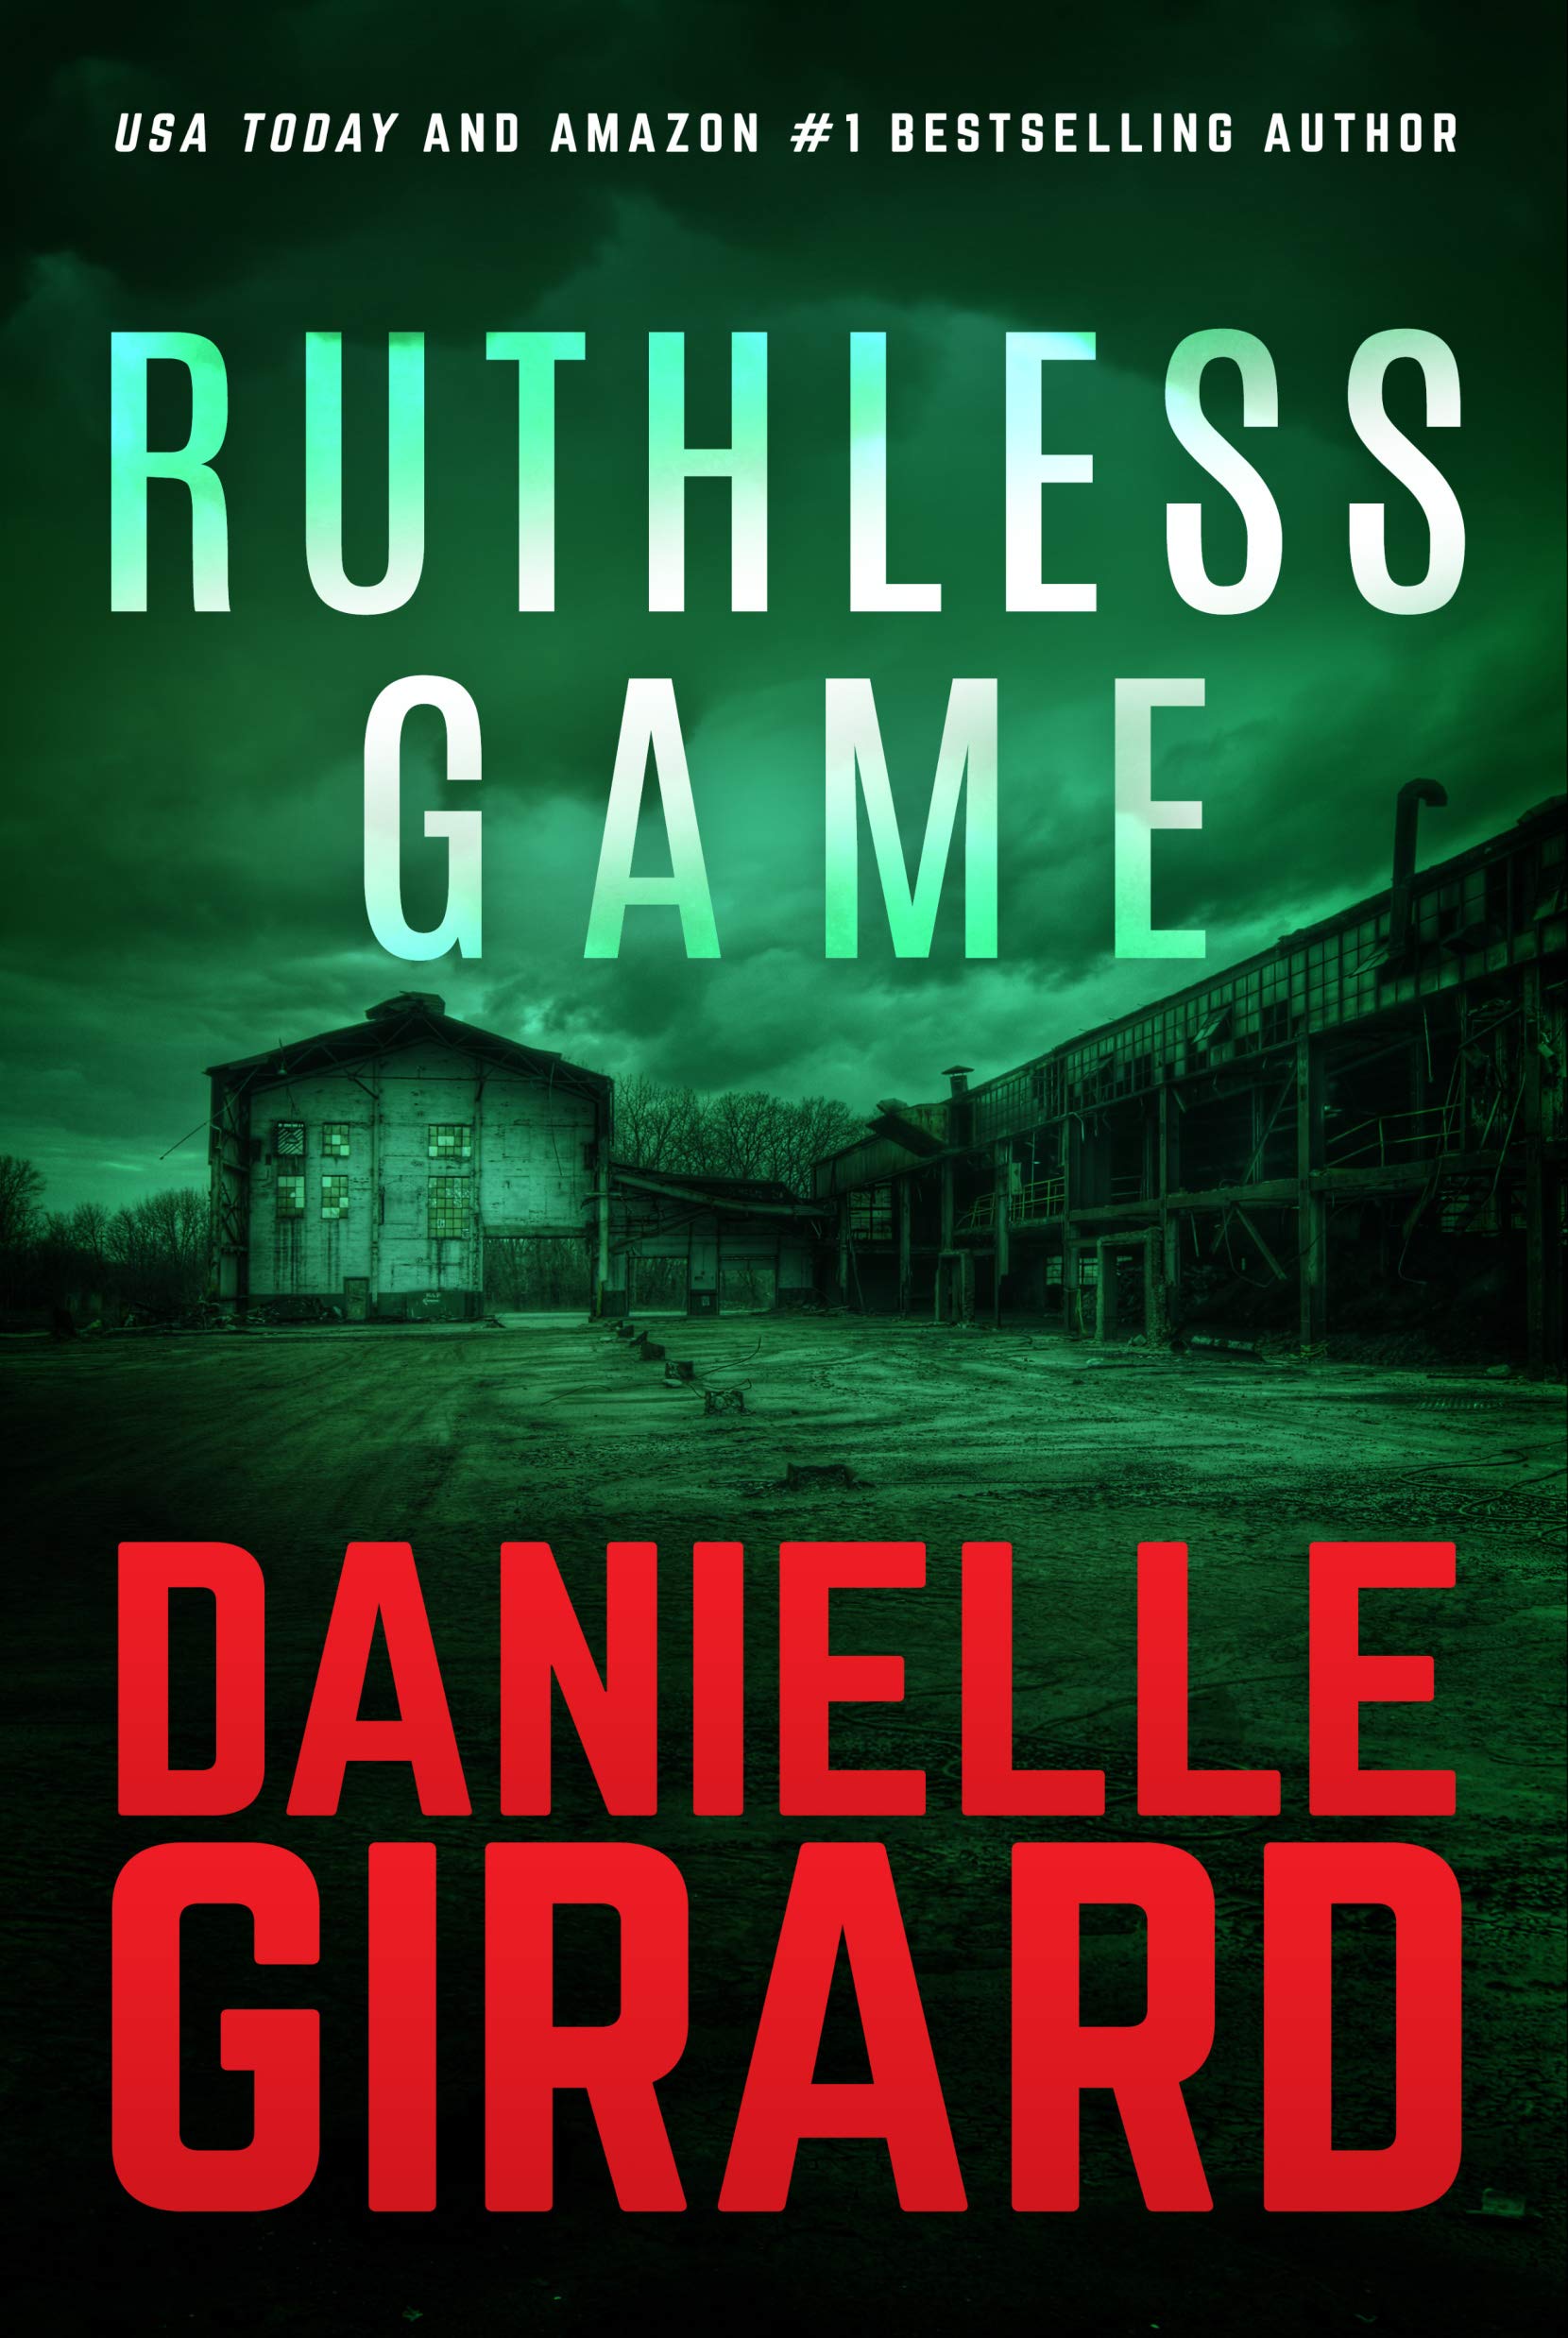 Ruthless Game: A Captivating Police Detective Thriller